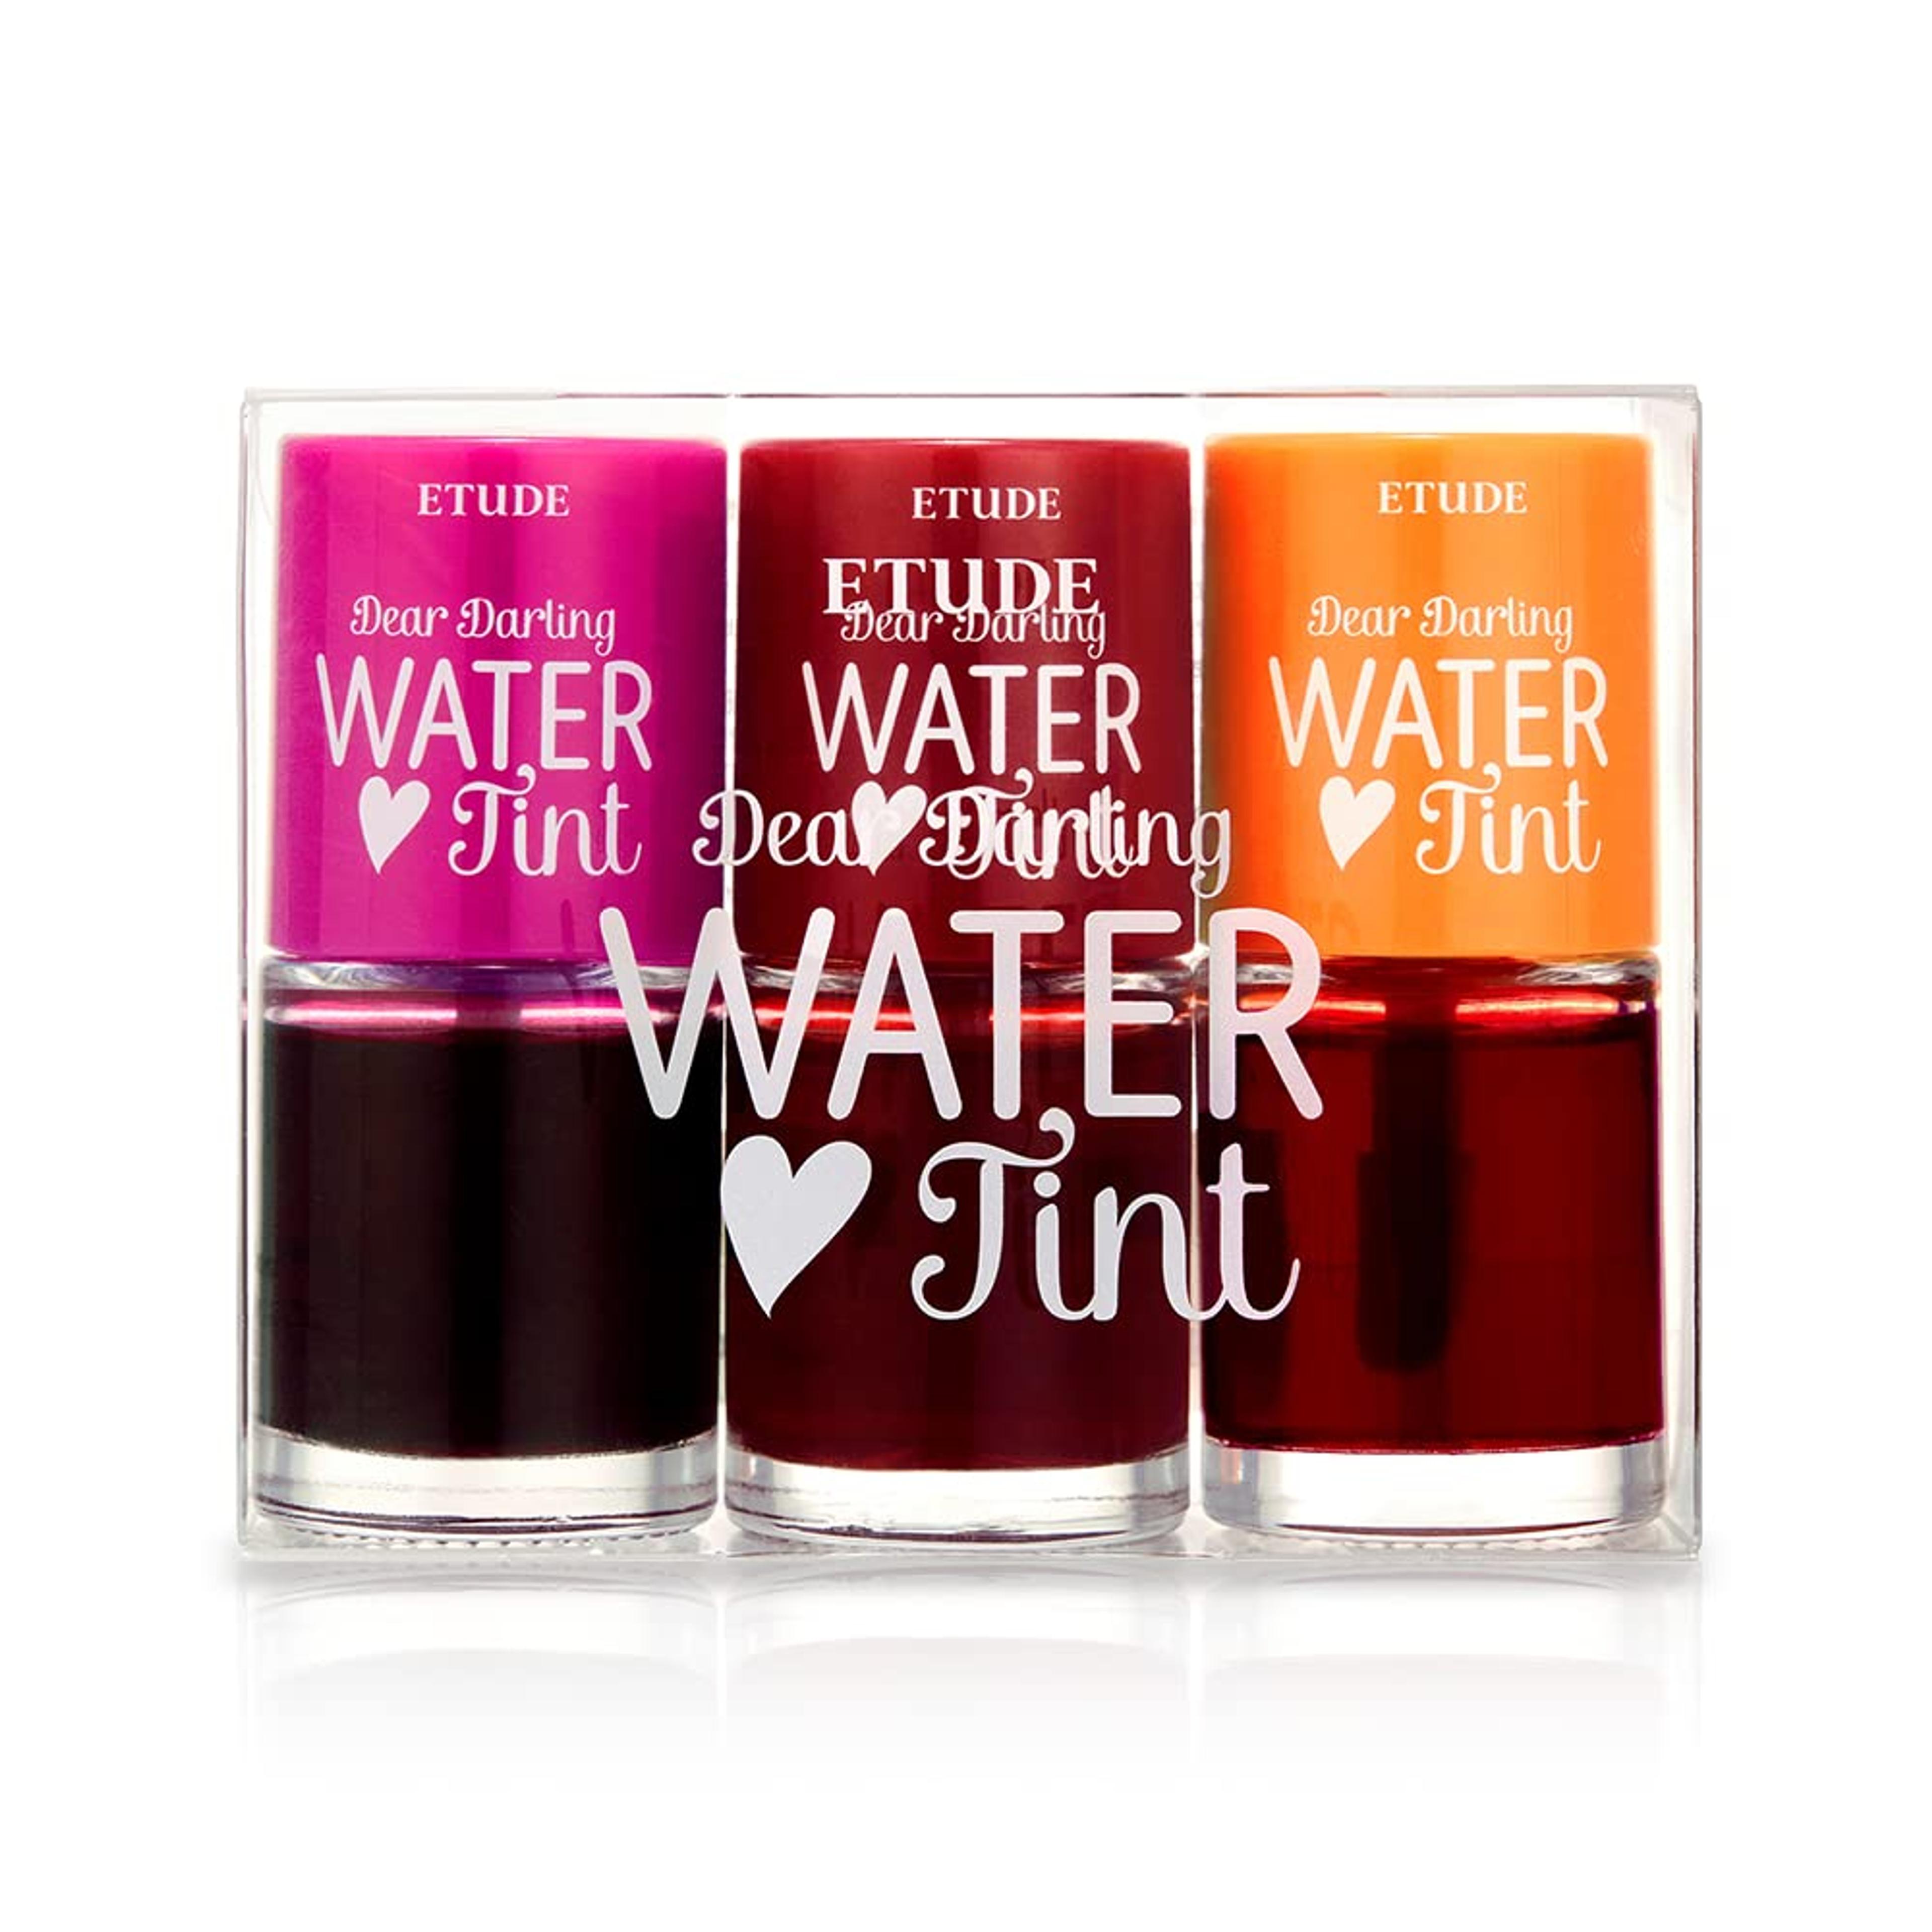 ETUDE Dear Darling Water Tint 3 Color SET 9.5g x 3color (21AD) | Bright Vivid Color Lip Tint with Moisturizing Pomegranate & Grapefruit Extract to Hydrate your Lips